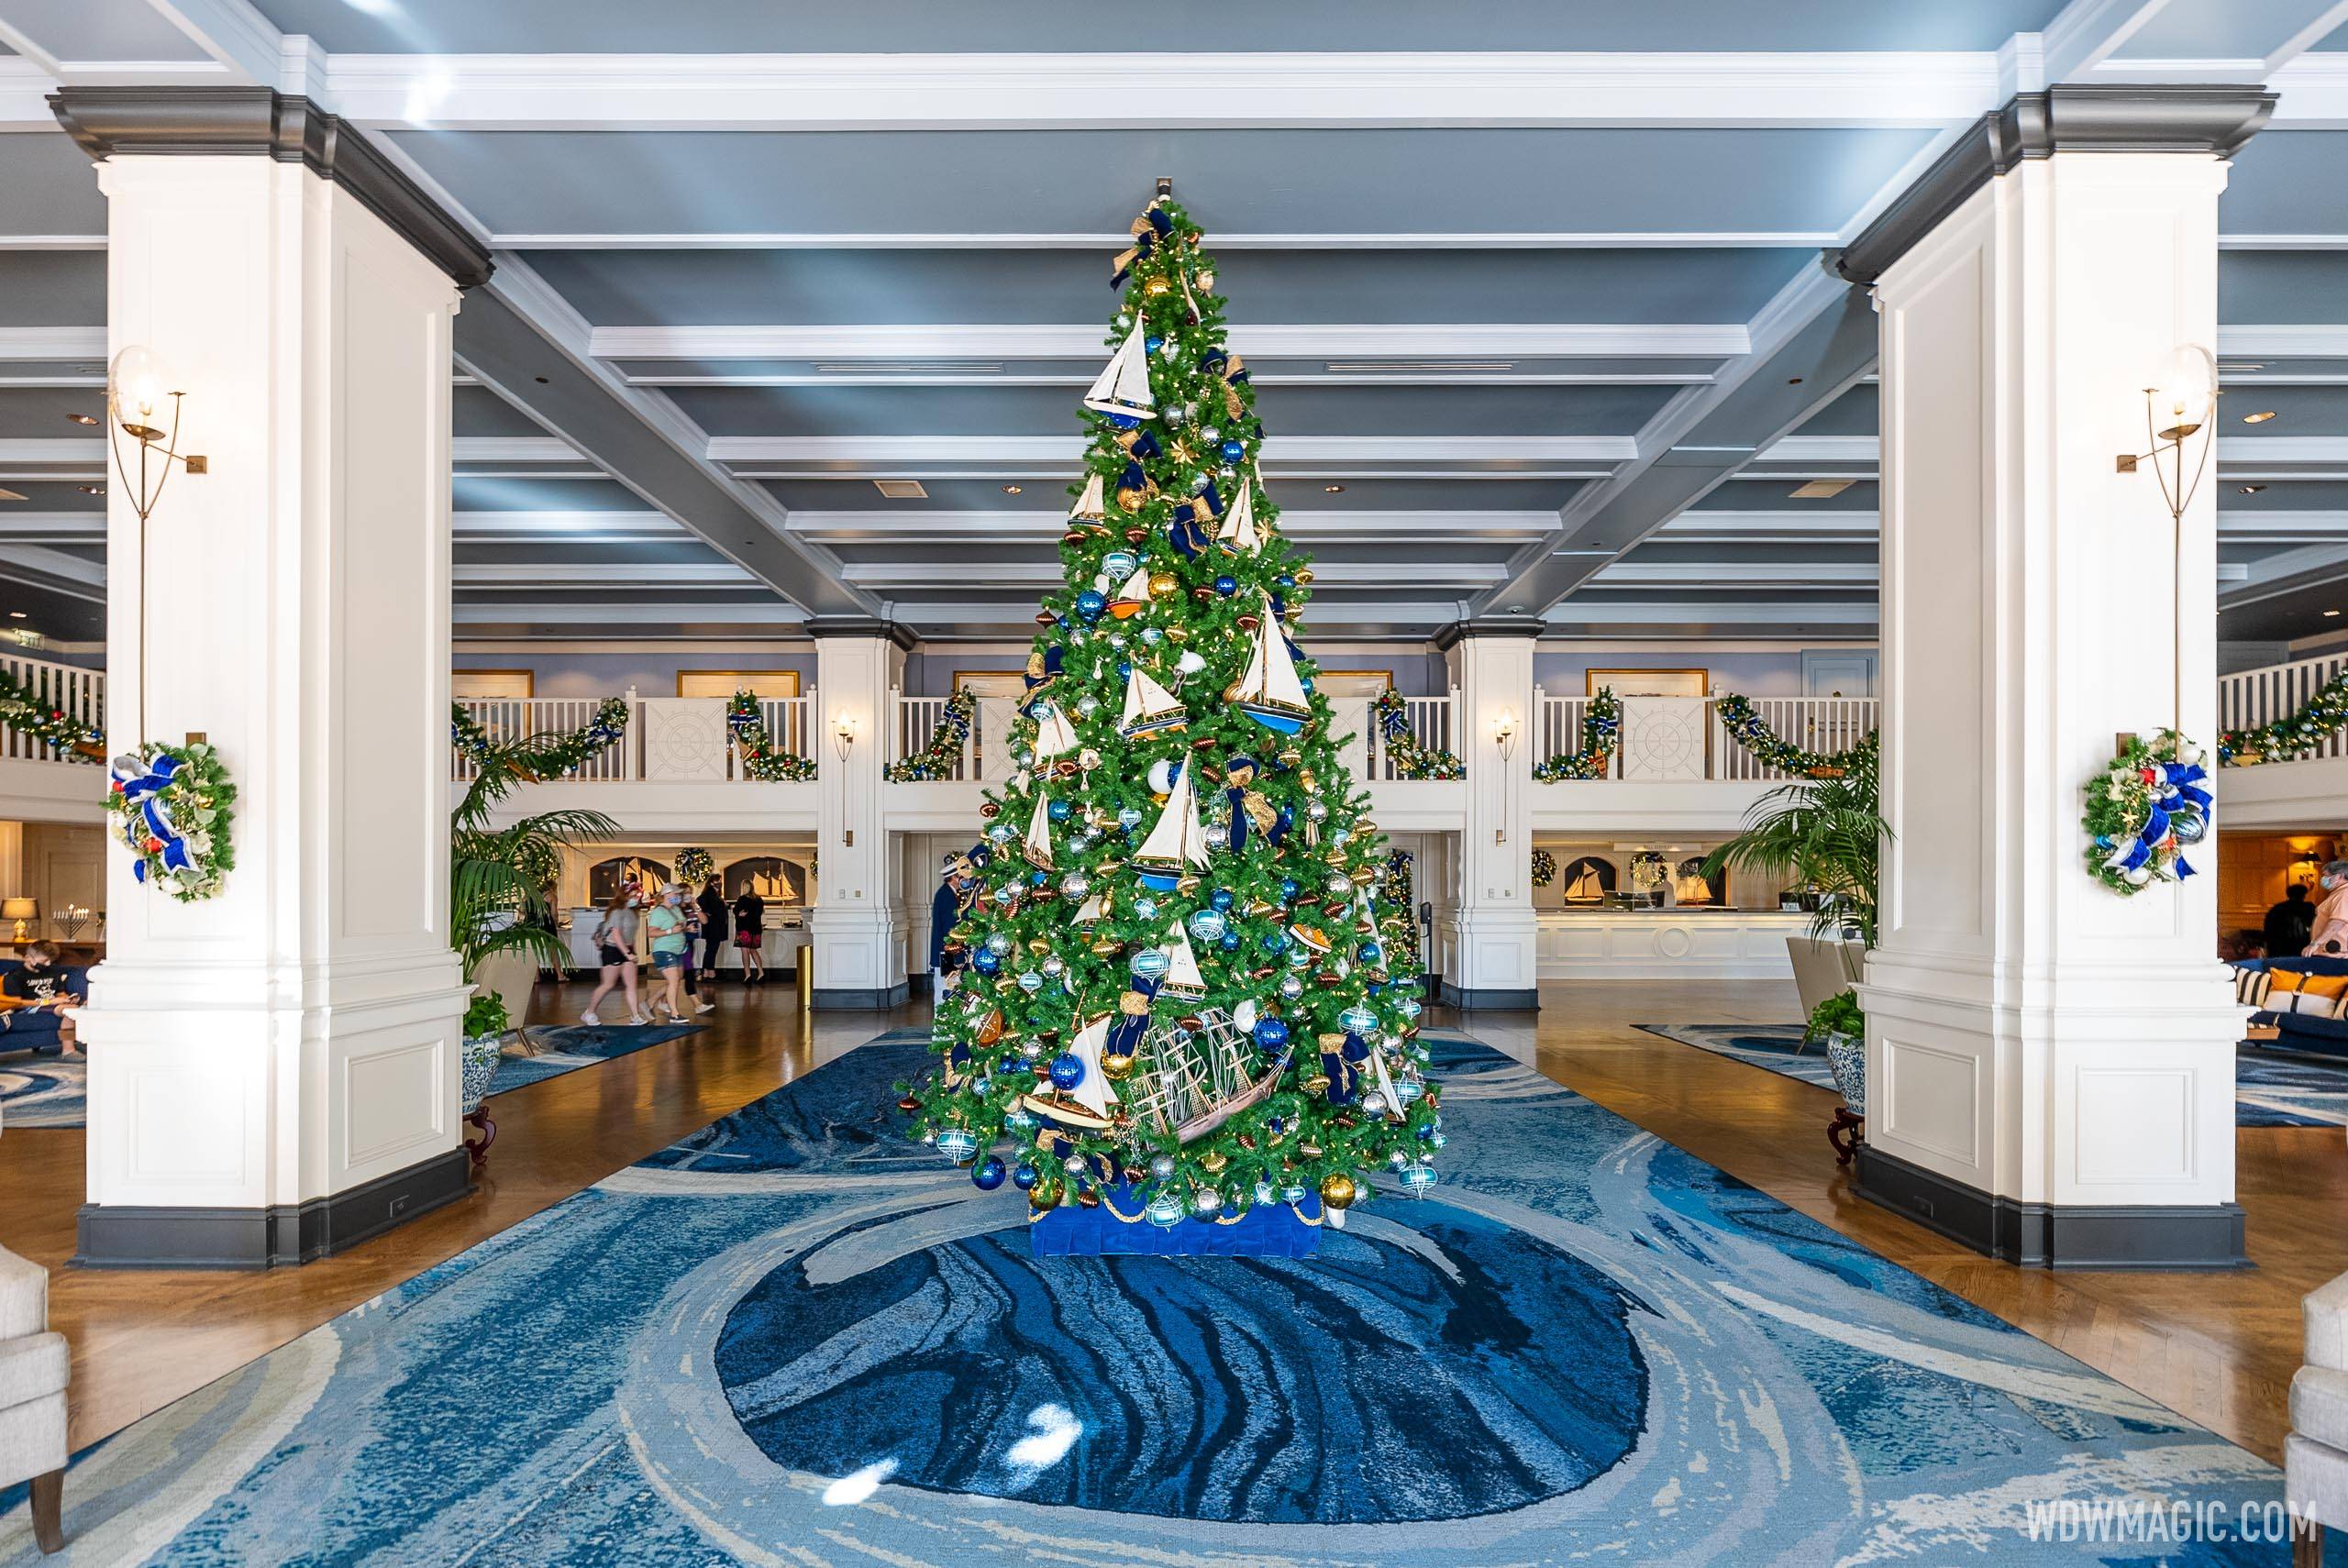 The Yacht Club Christmas Tree is in the center of the lobby